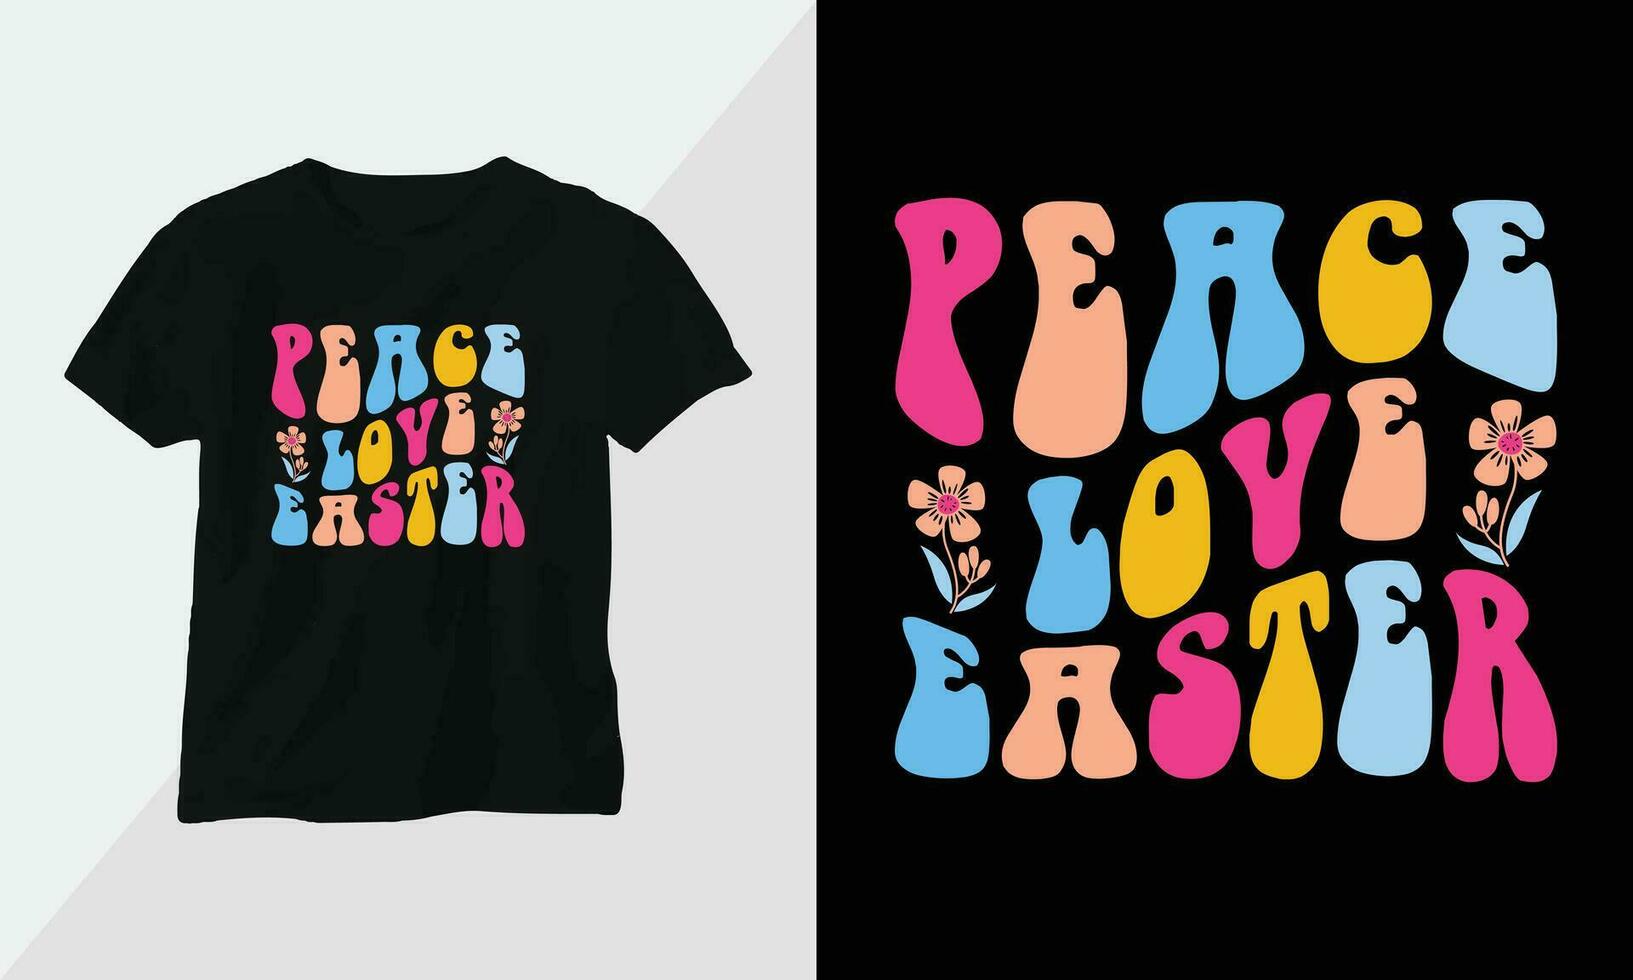 peace love easter - Retro Groovy Inspirational T-shirt Design with retro style vector